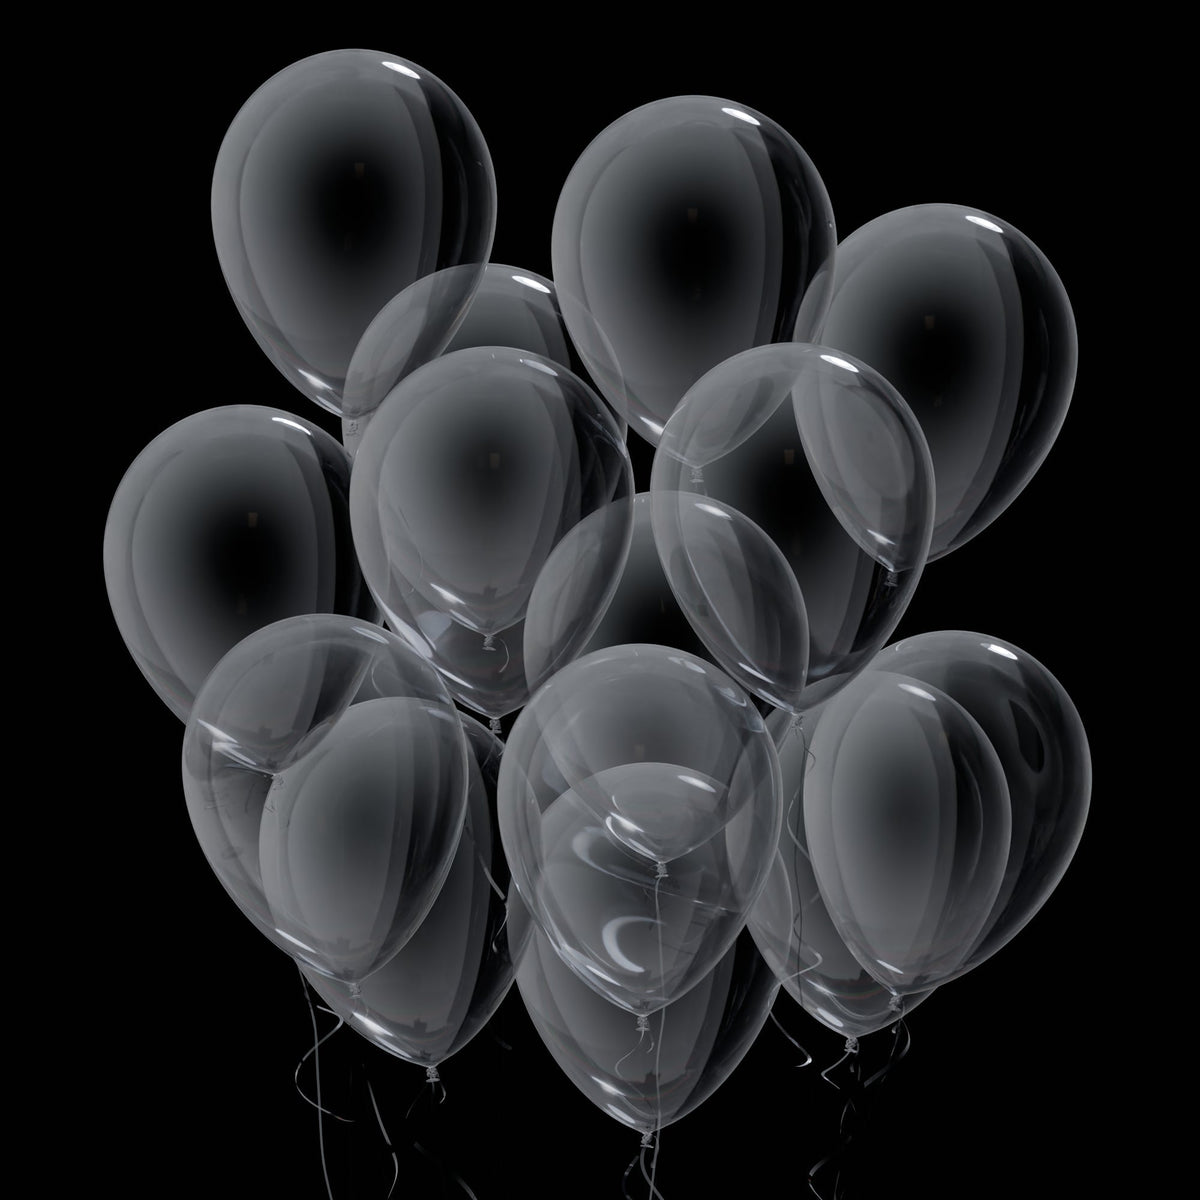 WIDE OCEAN INTERNATIONAL TRADE BEIJING CO., LTD Balloons Clear Latex Balloon 12 Inches, 15 Count 810064197437